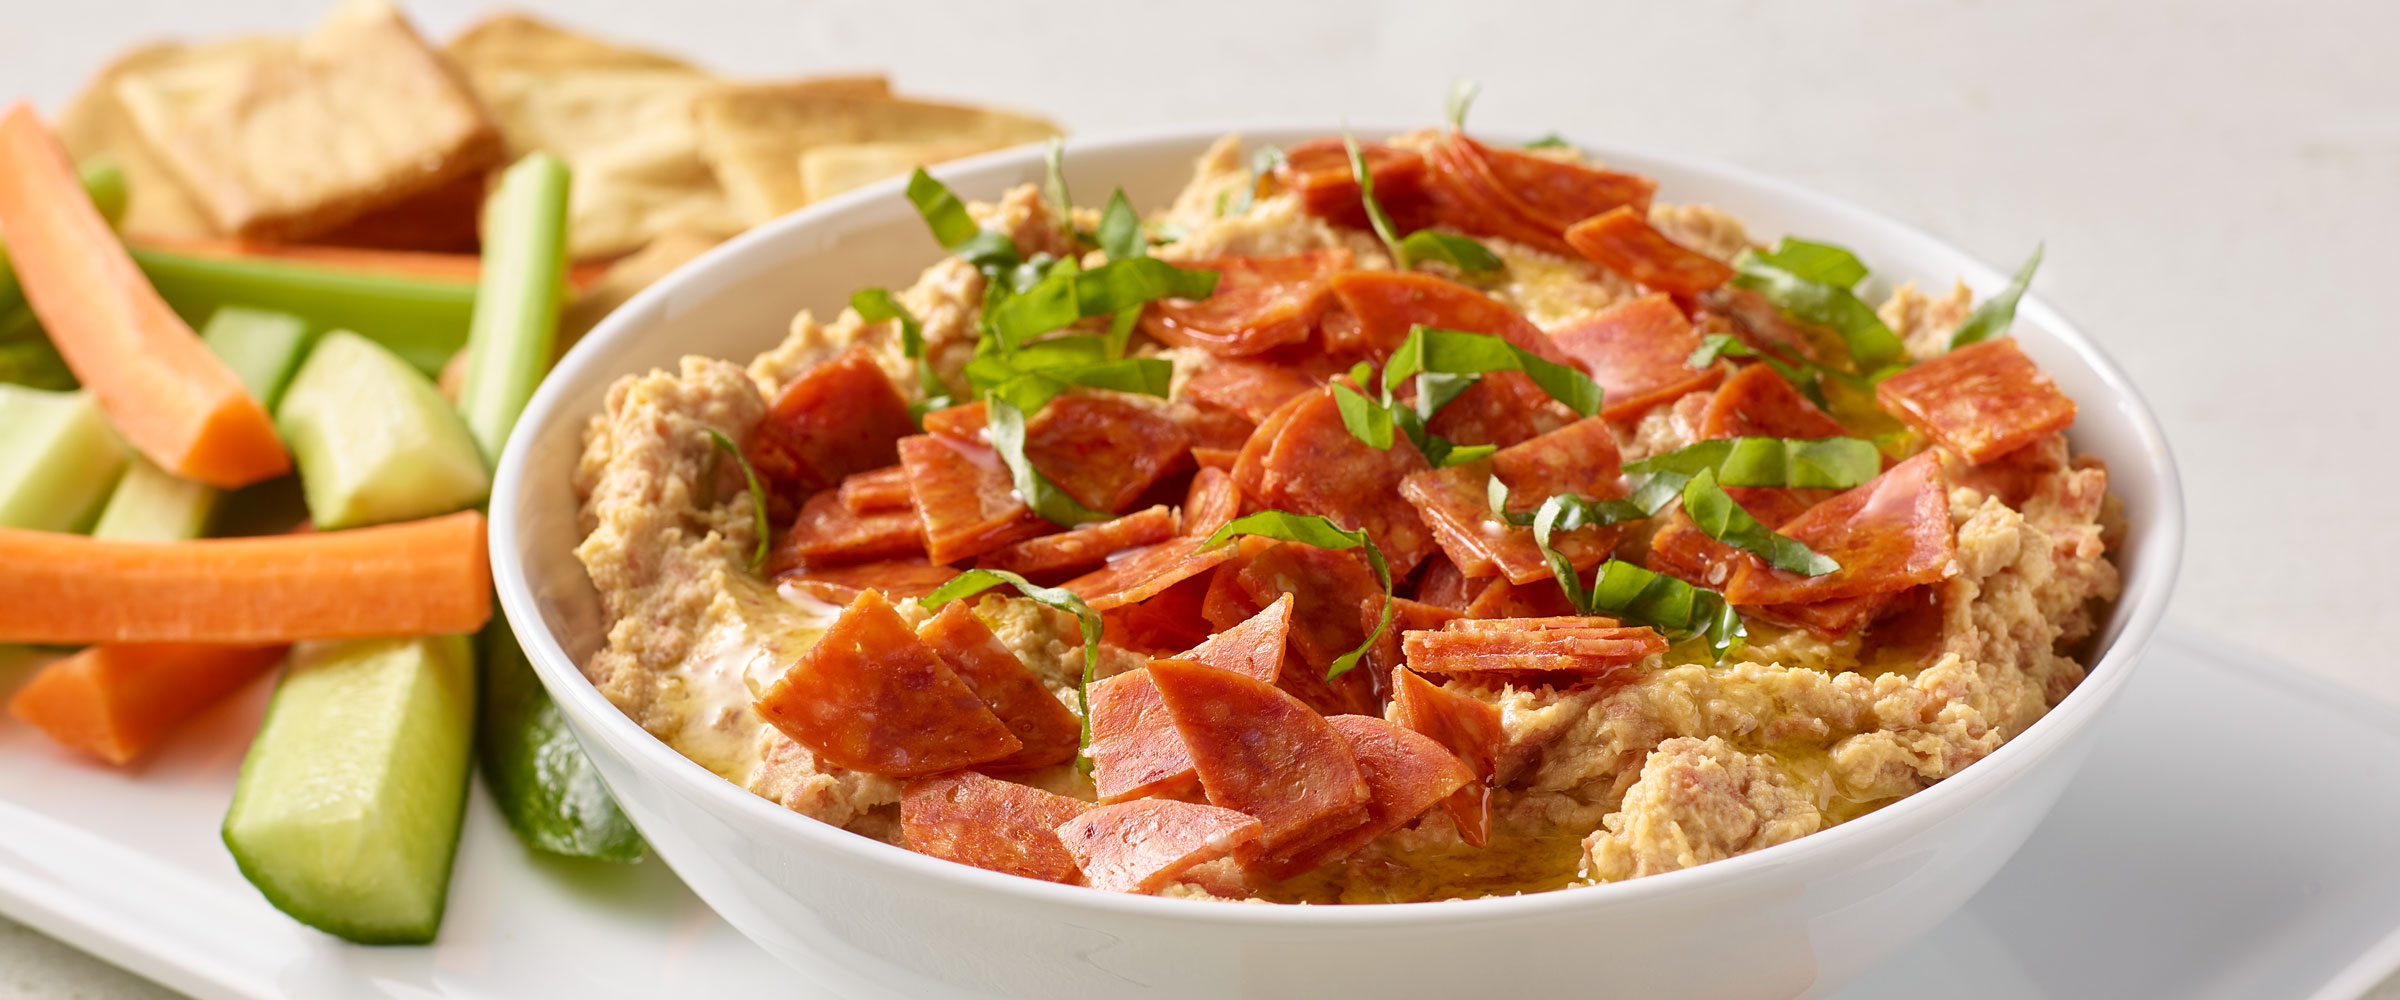 Pepperoni Hummus with garnish in white bowl with vegetables and crackers on side